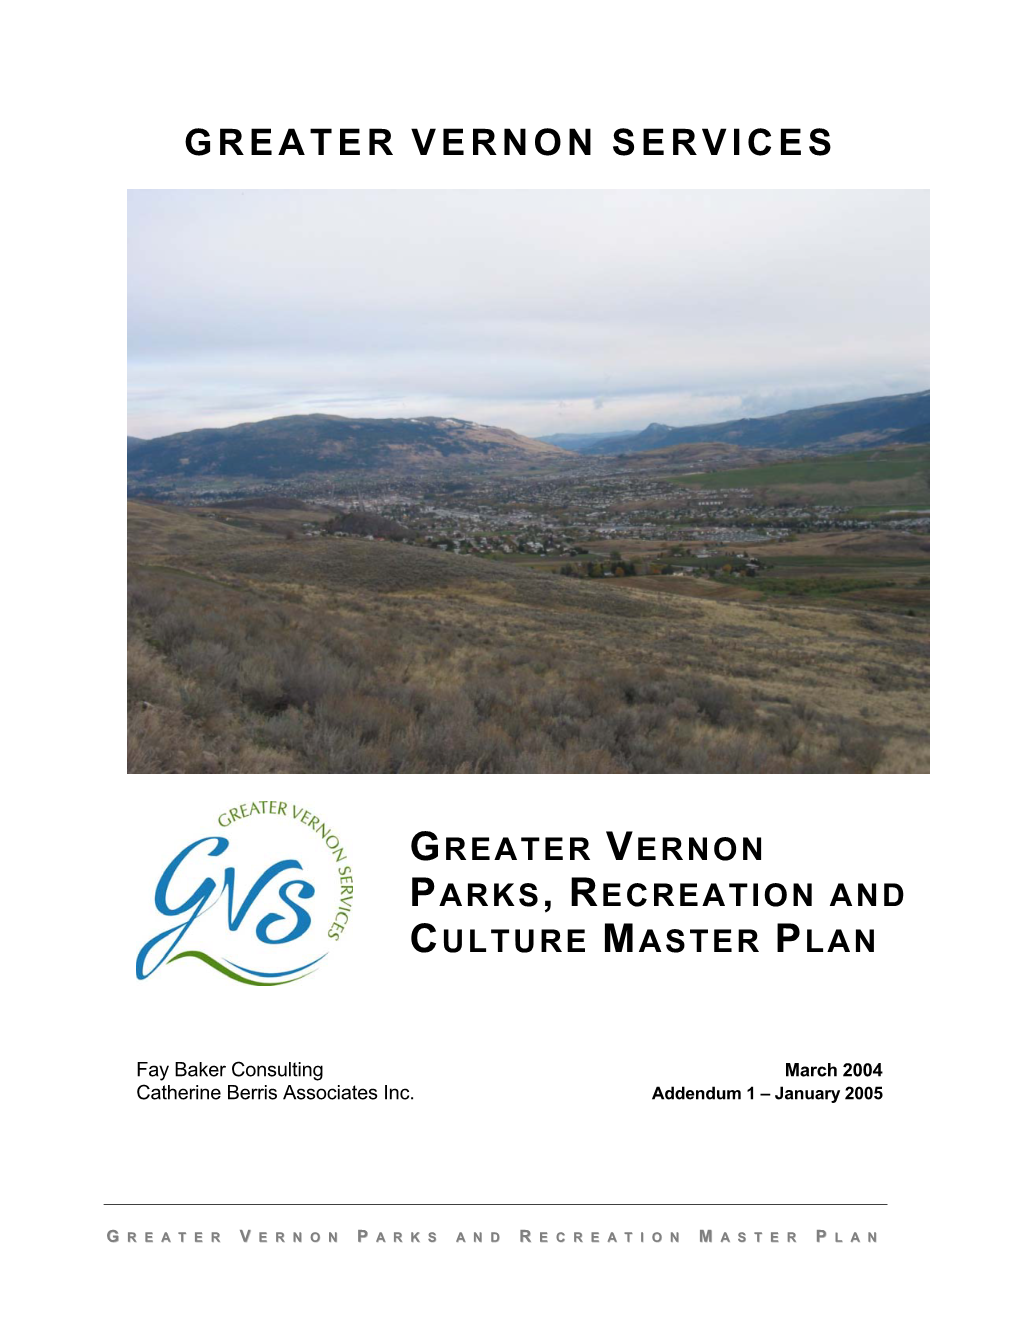 Greater Vernon Parks, Recreation and Culture Master Plan